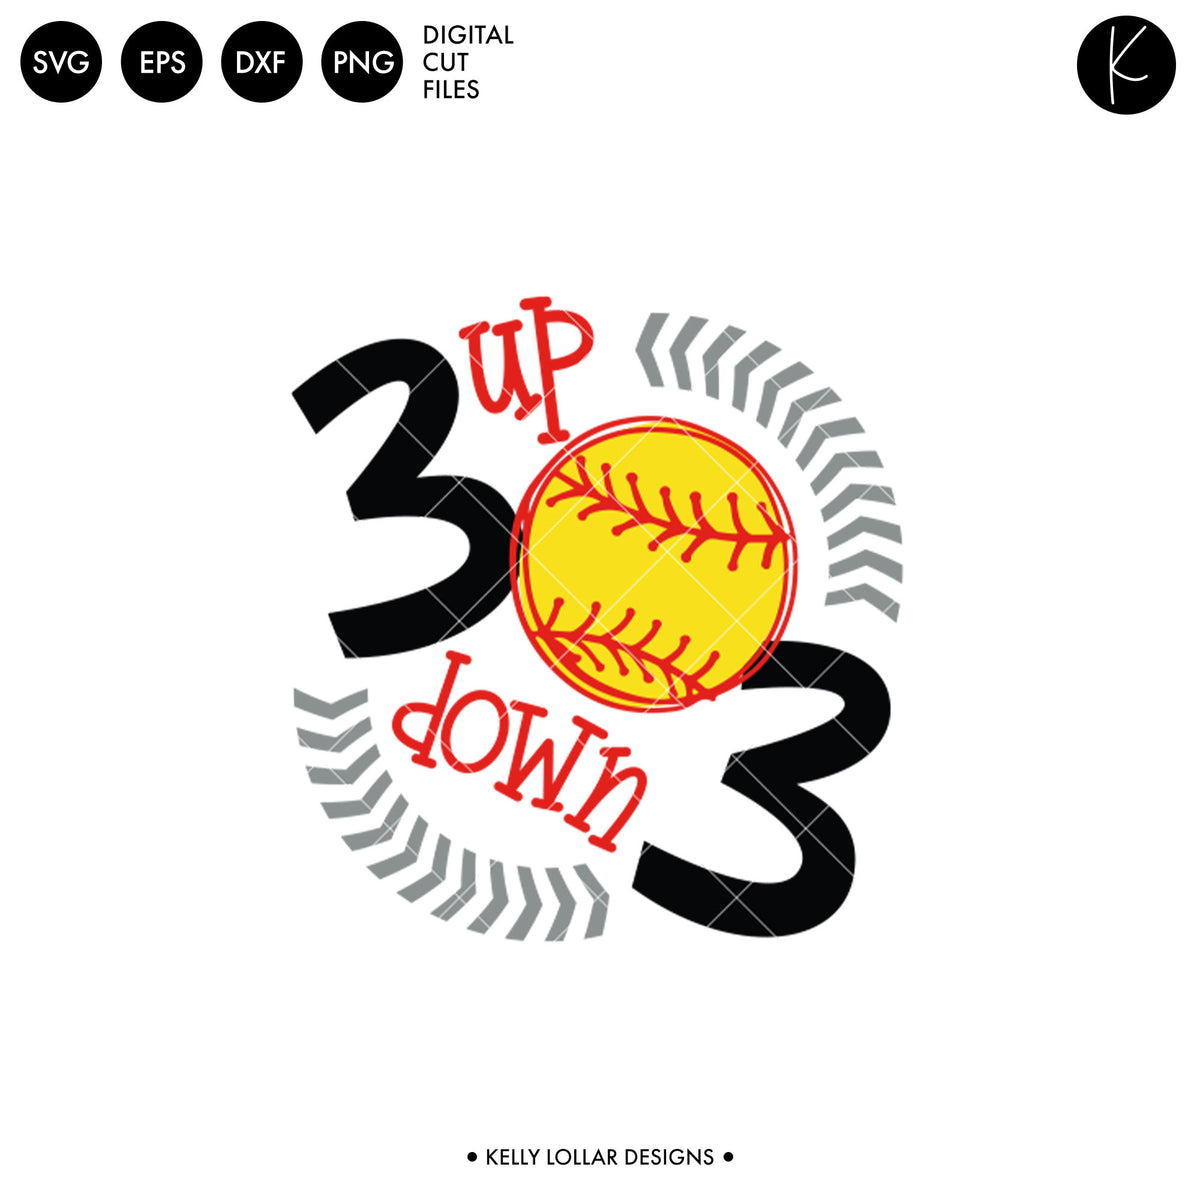 3 Up 3 Down Baseball or Softball | SVG DXF EPS PNG Cut Files